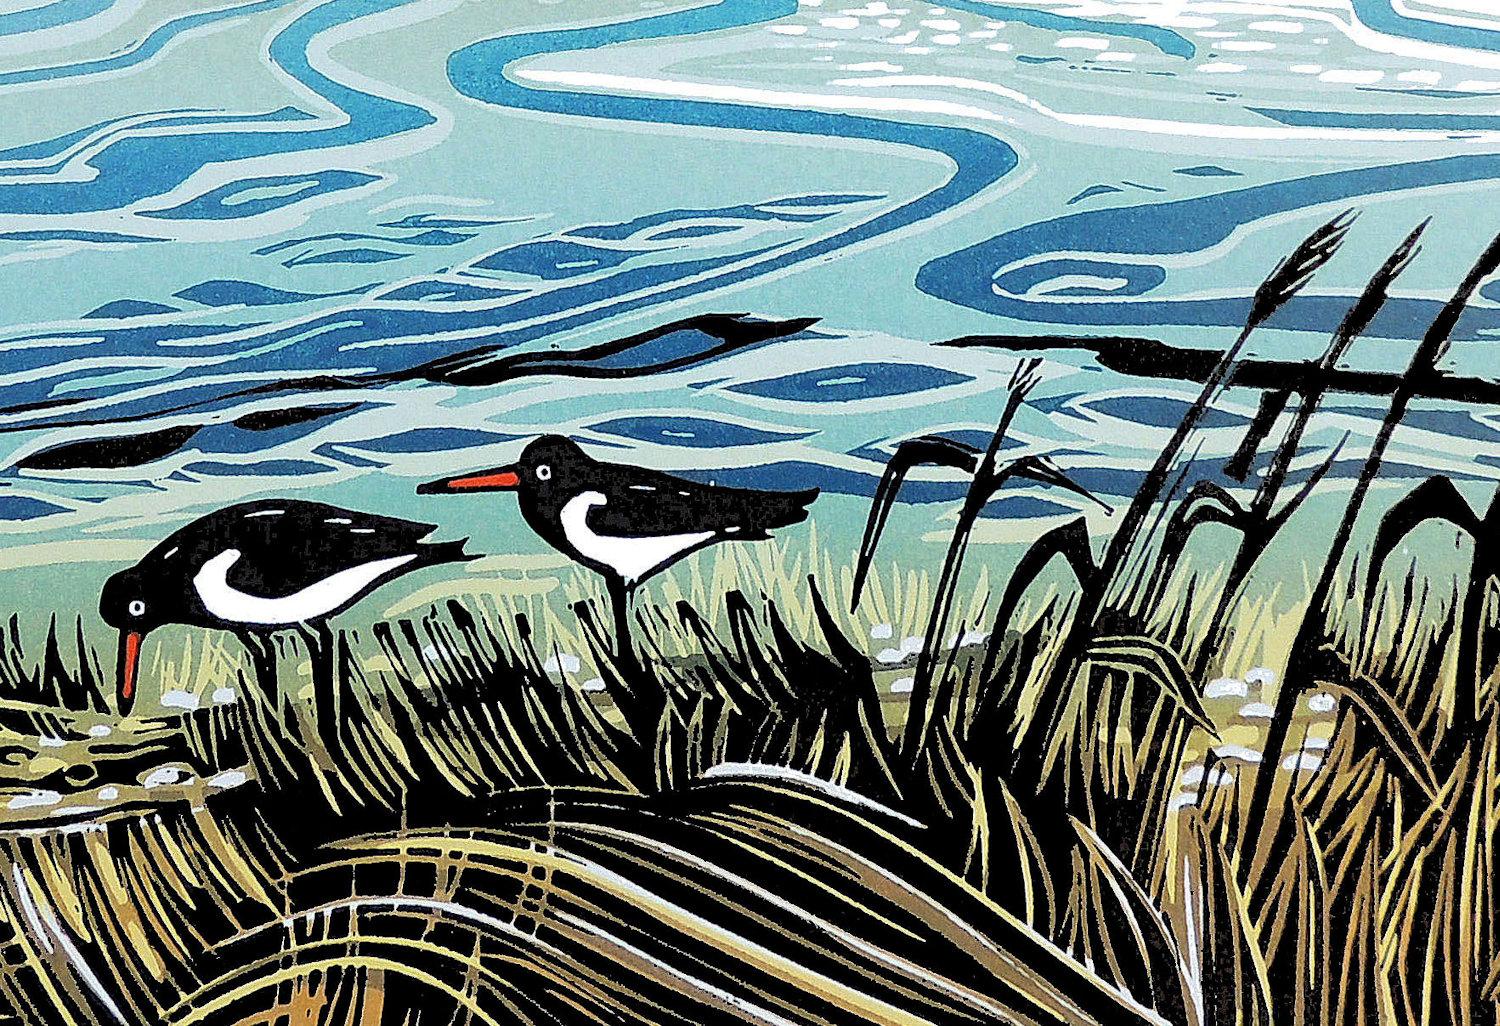 Waterway with Linocut, Print by Rob Barnes 5